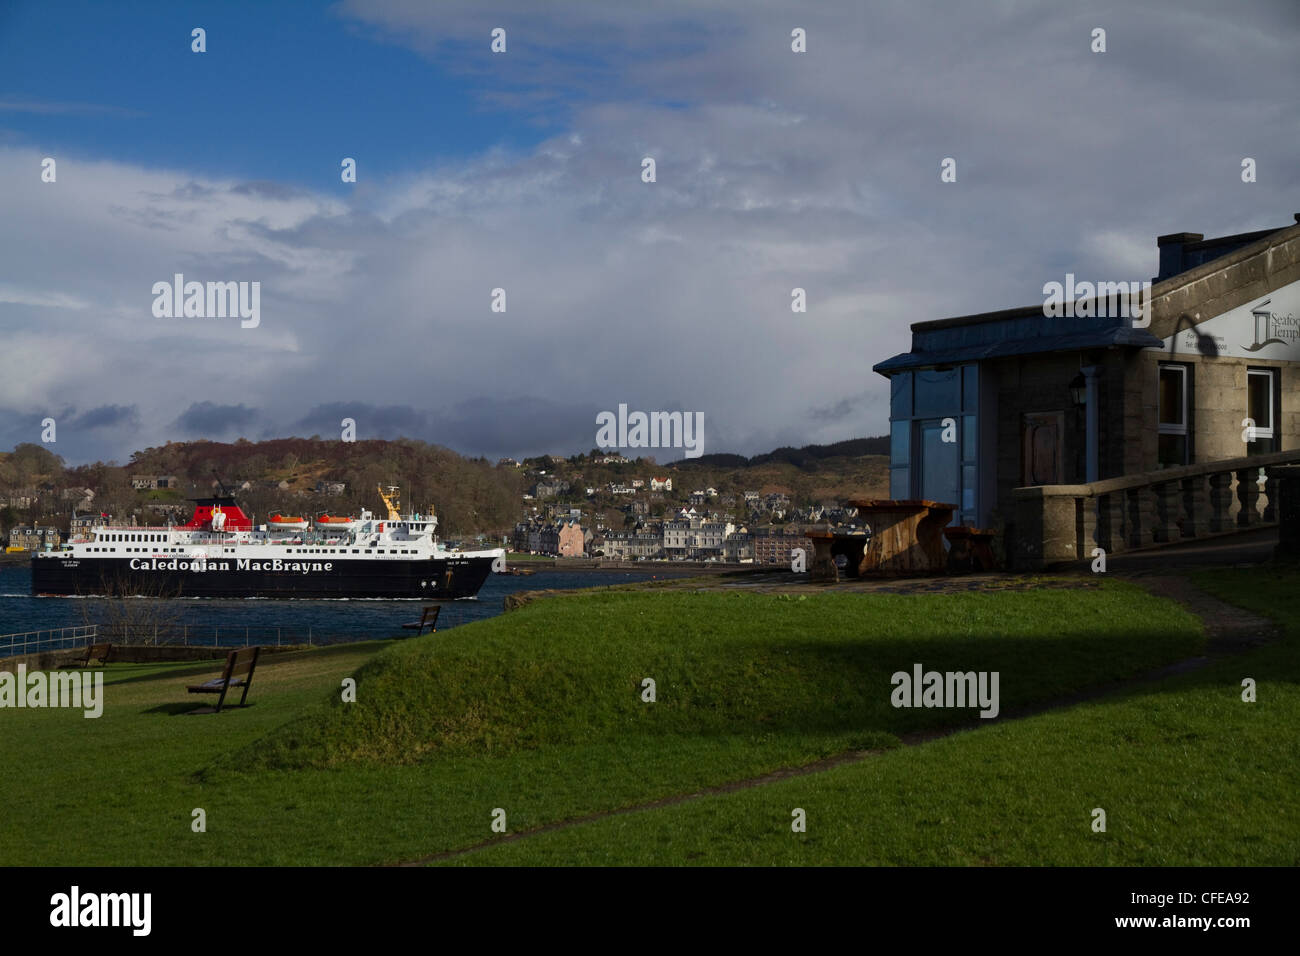 A passenger ferry in Oban, West Coast of Scotland, from Dungallan Park with the Seafood Temple restaurant in the foreground Stock Photo